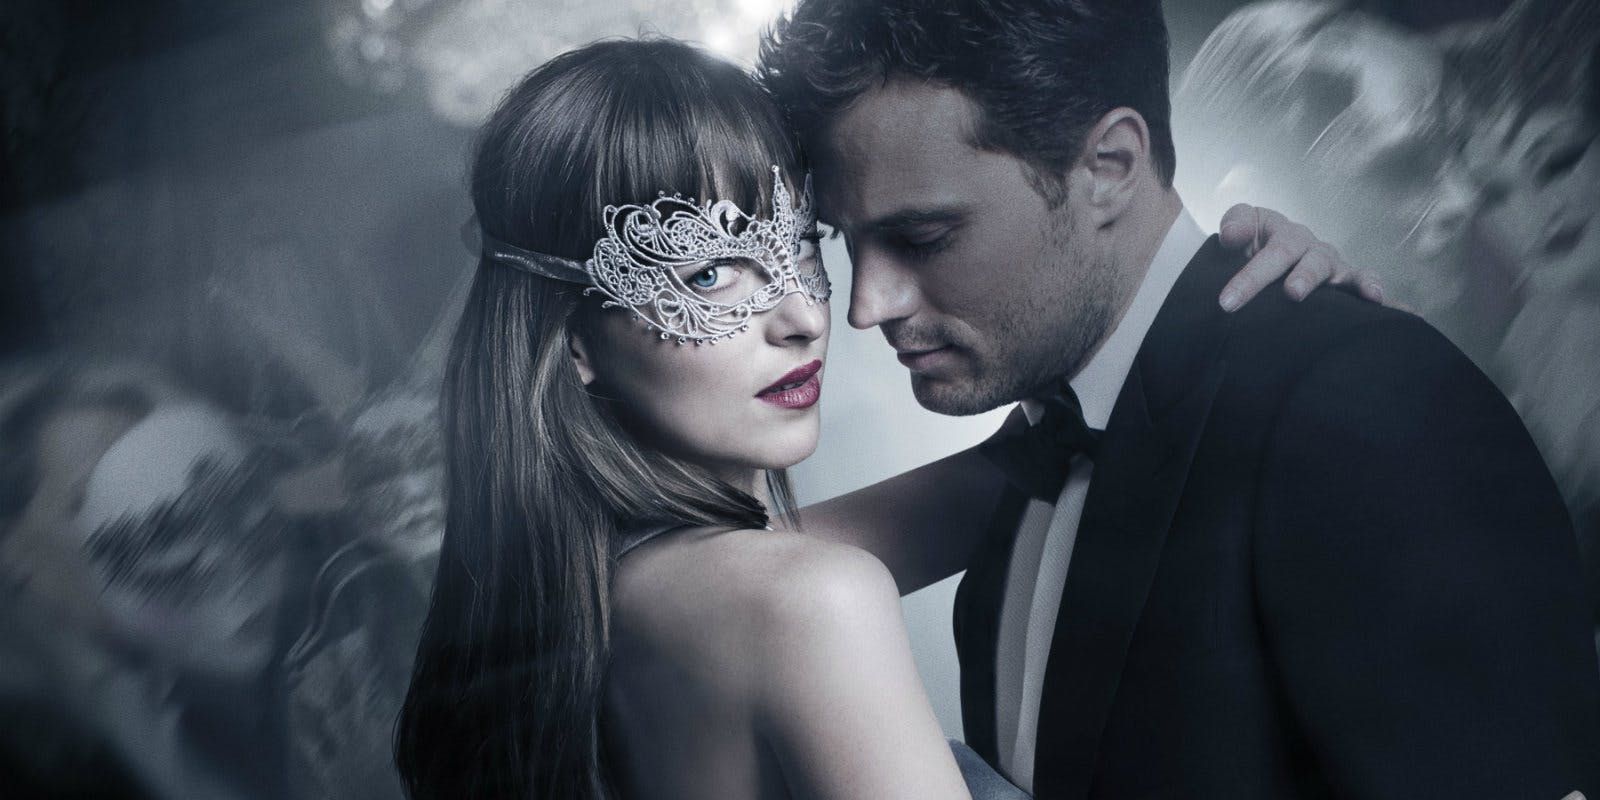 Anastasia and Christian dance together in a promo image for Fifty Shades Darker 